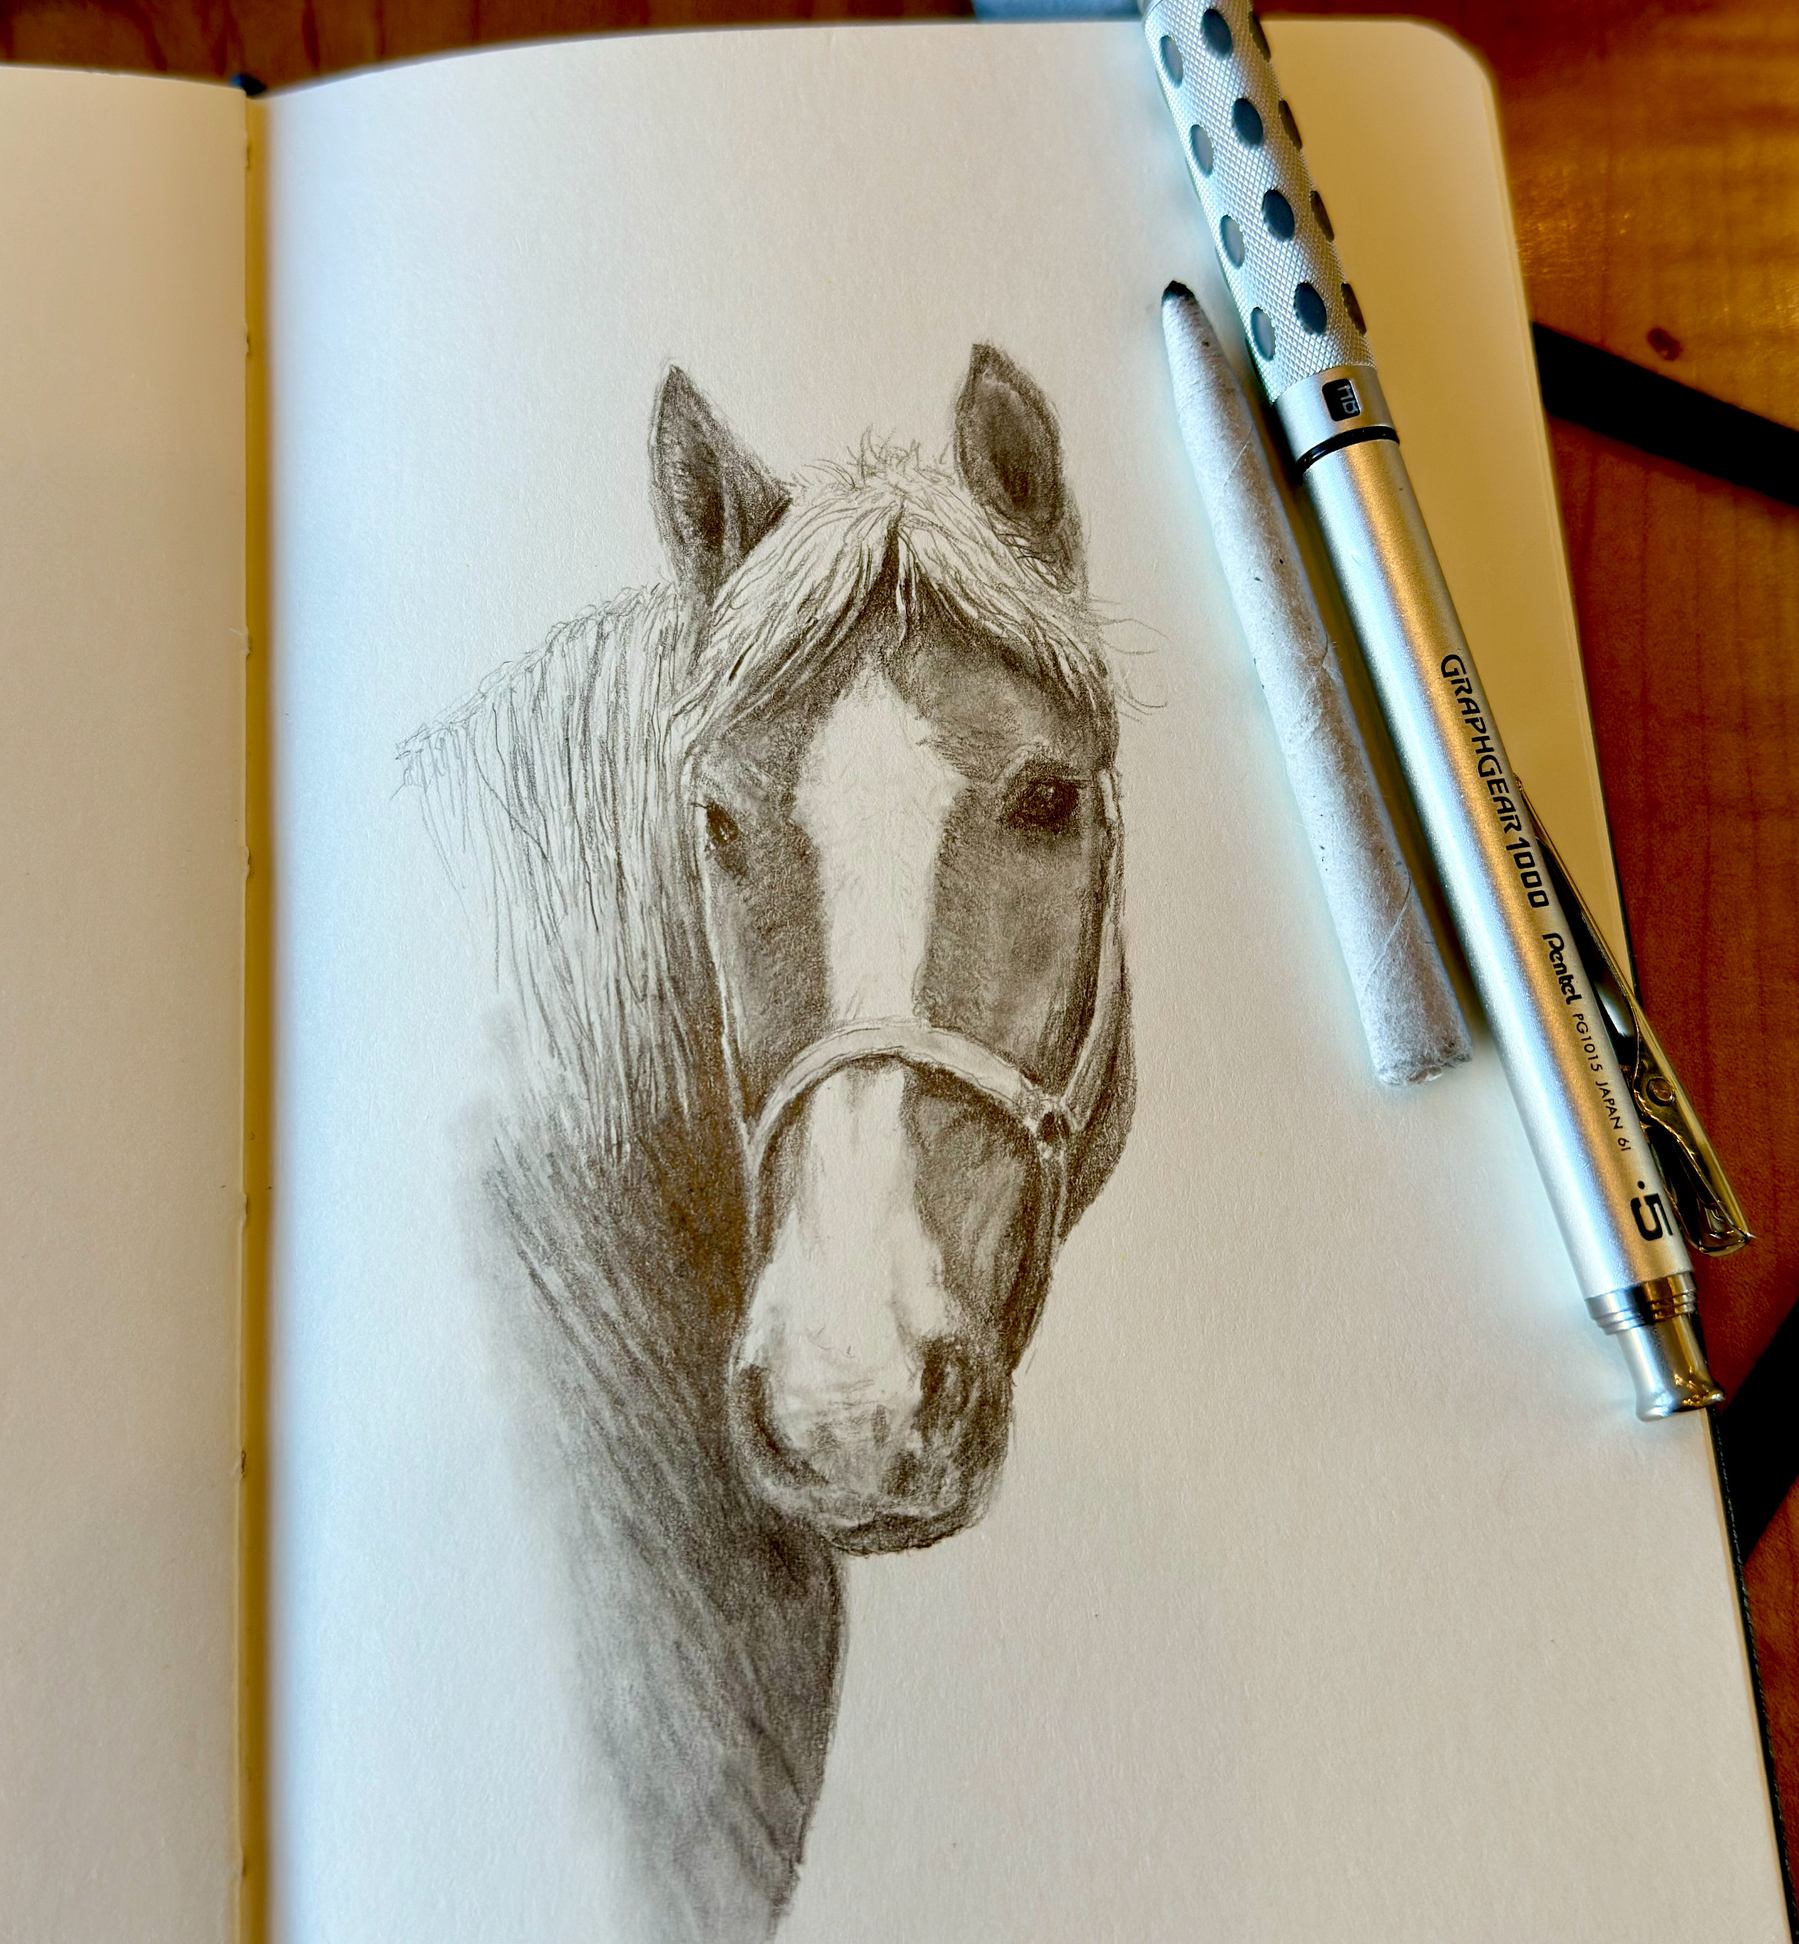 Pencil drawing of a horse’s head on a sketchbook page, with great attention to detail and shading. The horse is wearing a halter and appears calm and gentle. Art supplies, including a mechanical pencil and a kneaded eraser, rest beside the sketchbook.